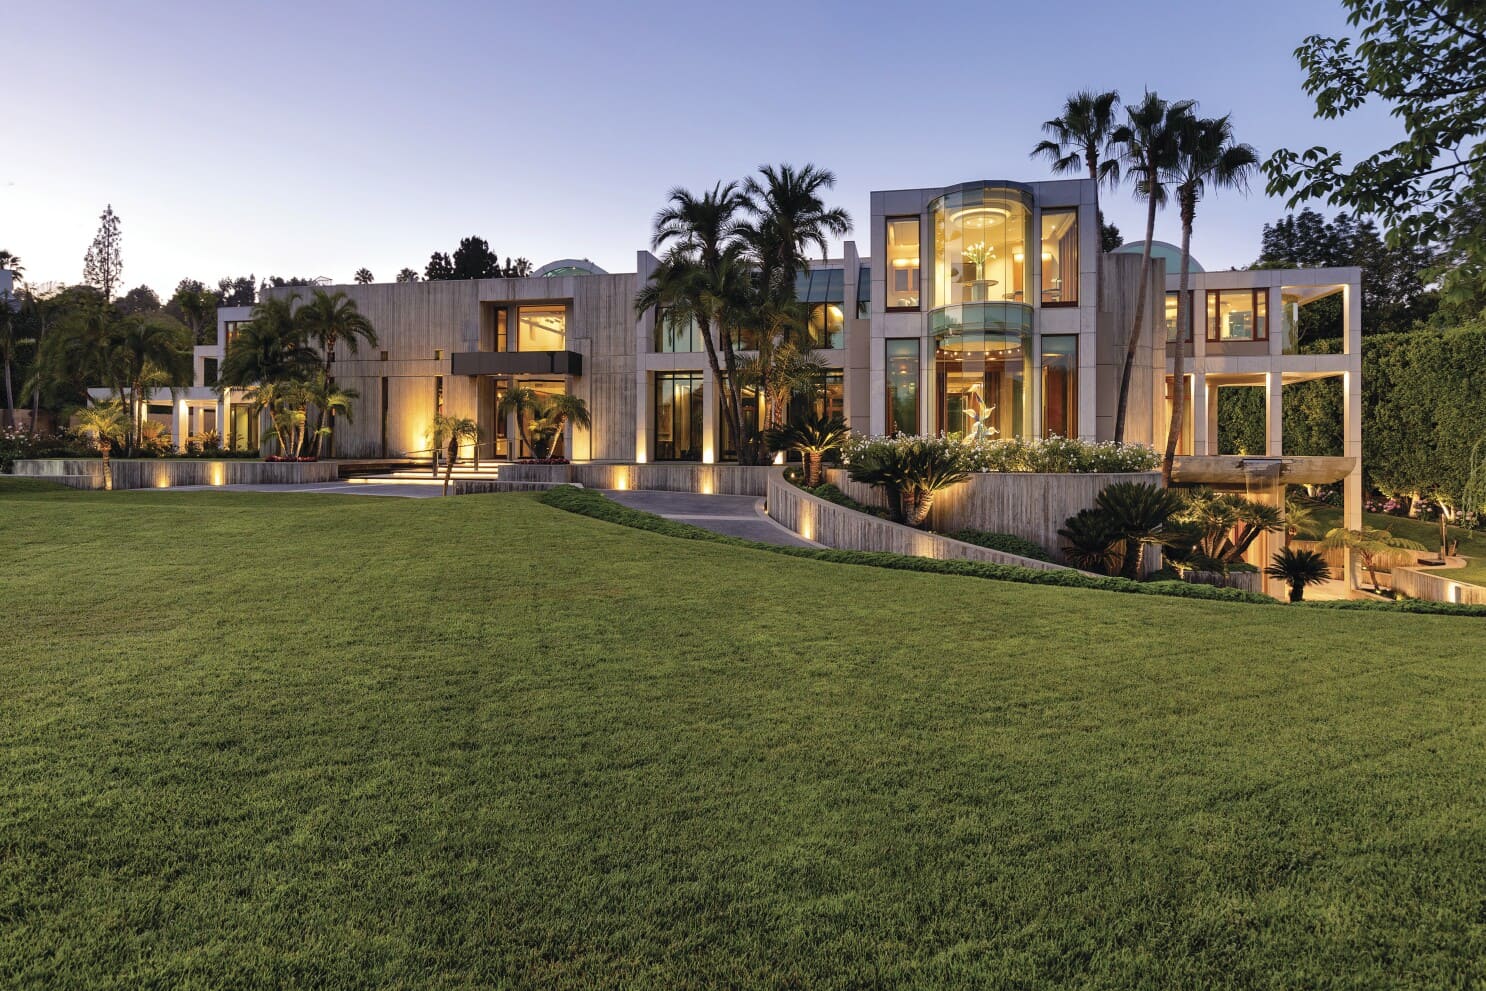 The Beverly Hills Estate.